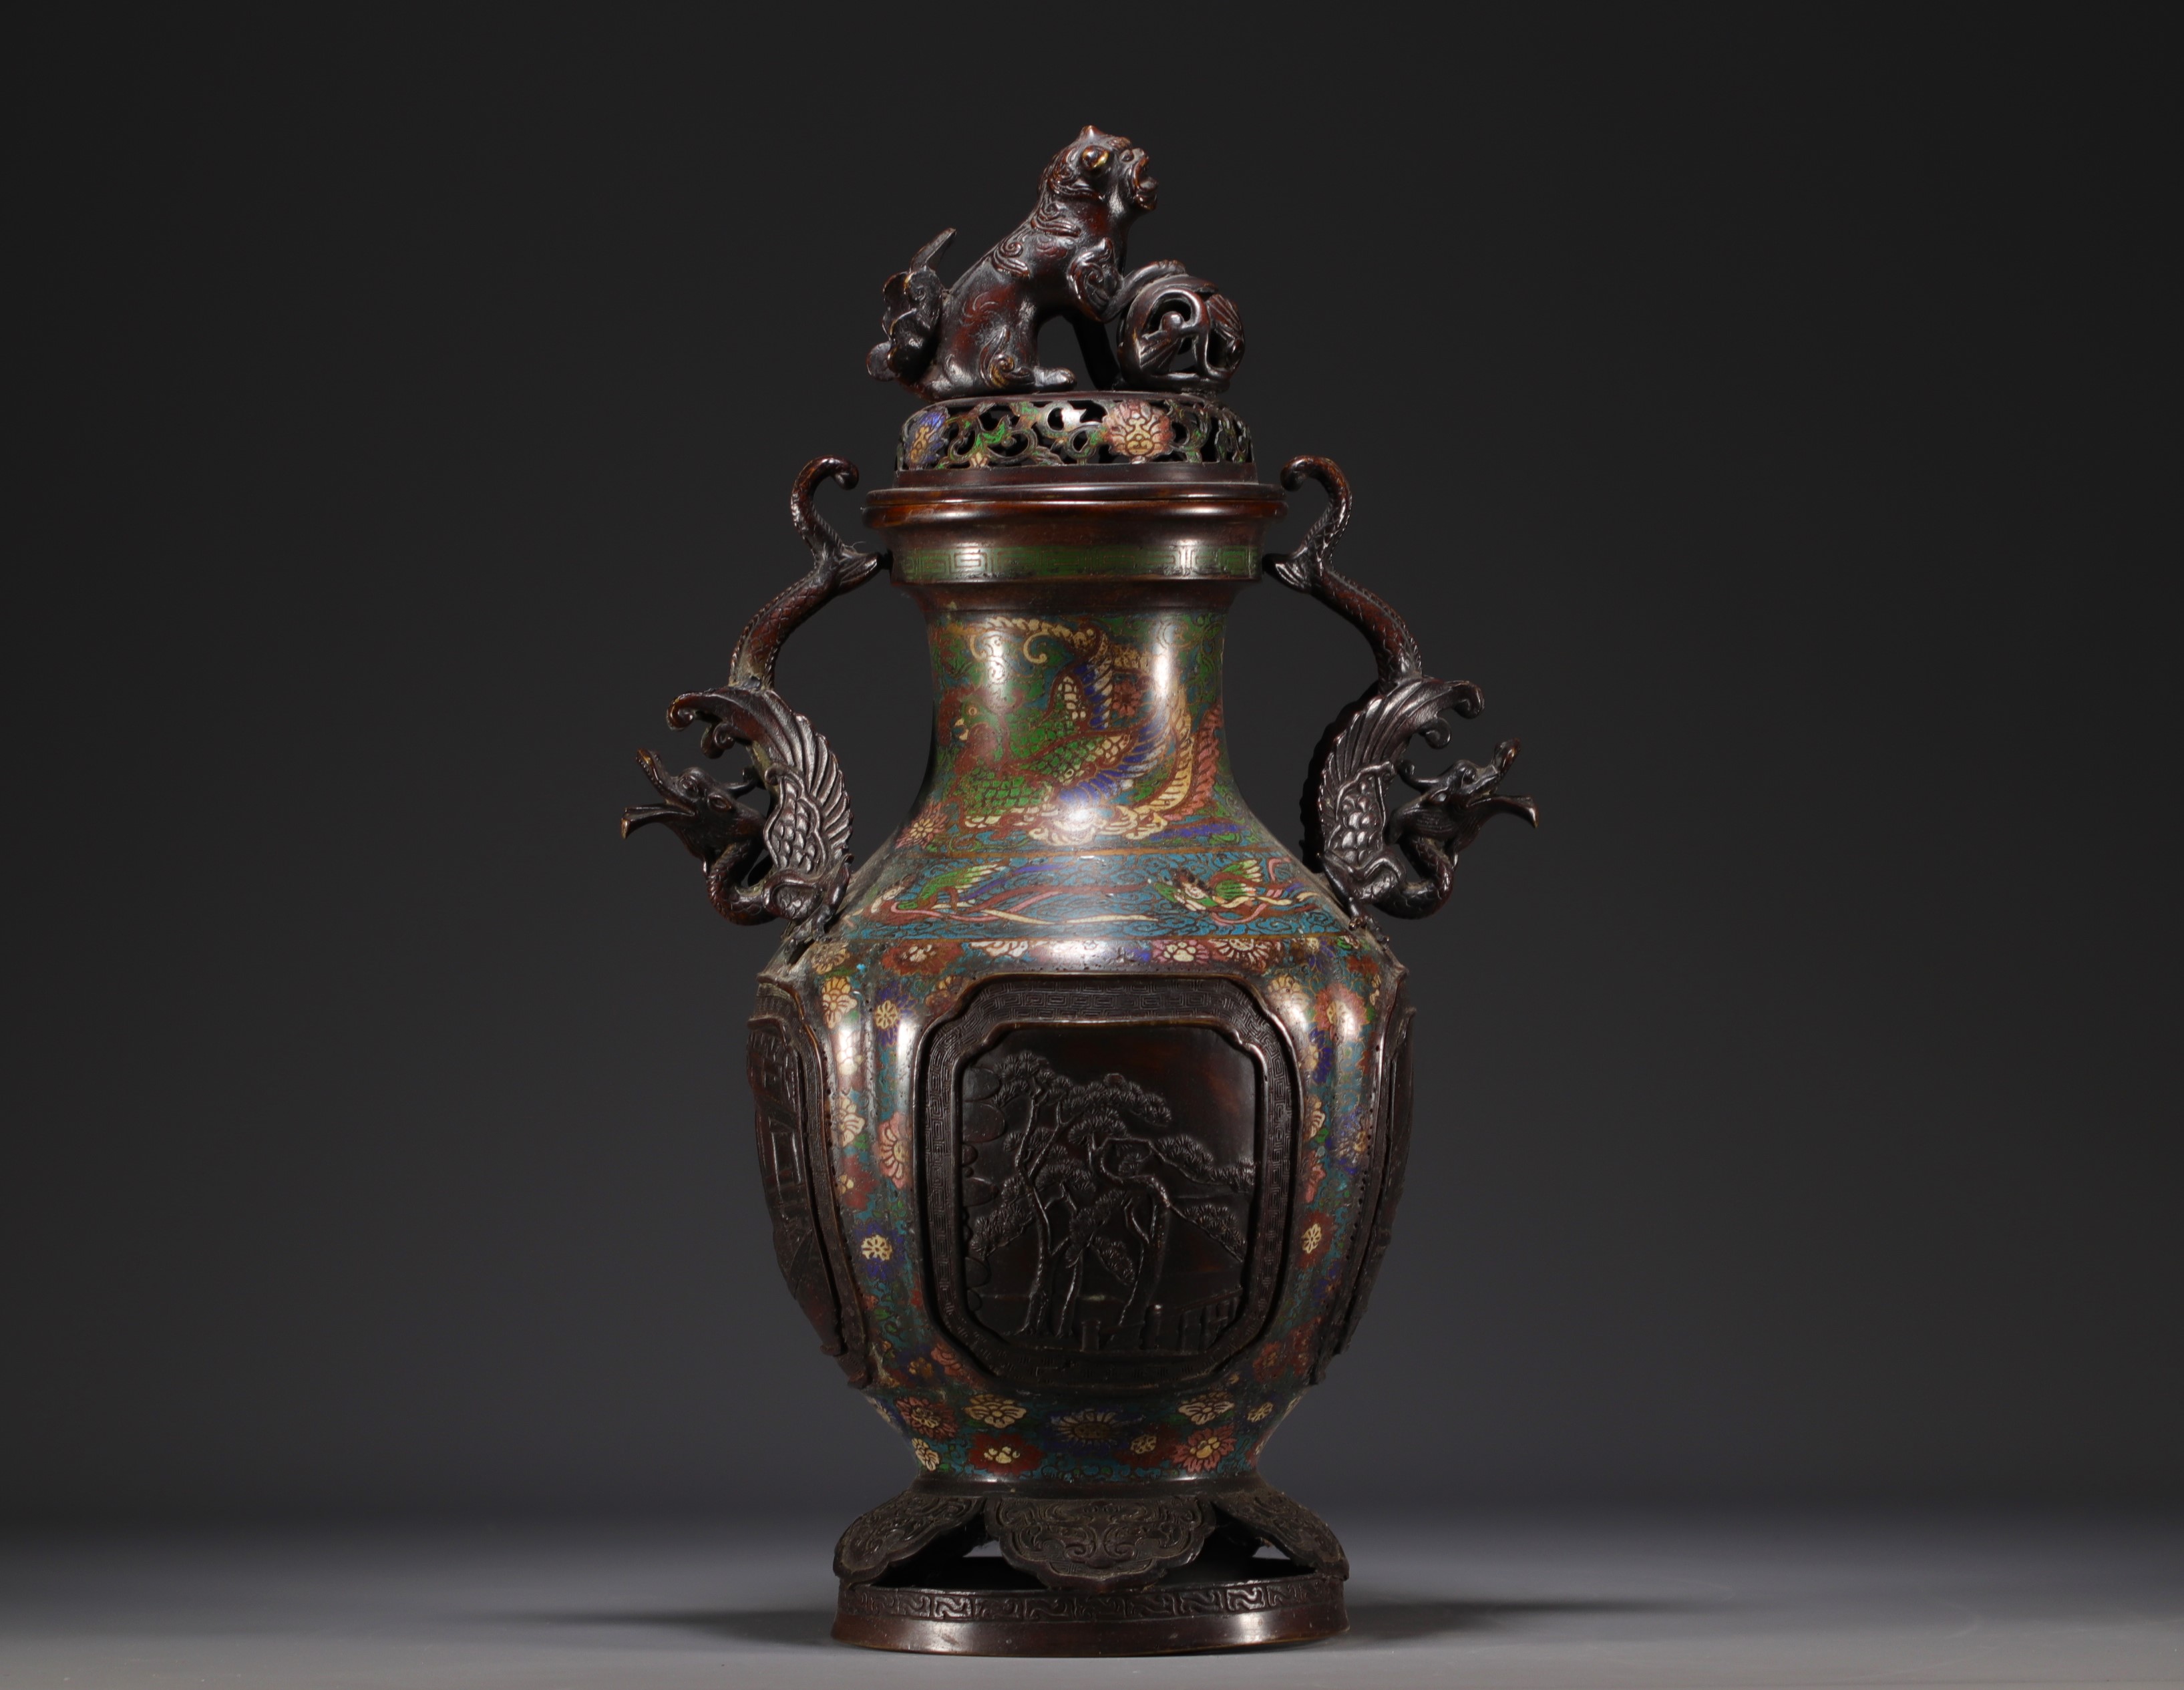 Japan - Cloisonne bronze perfume burner decorated with dragons and chimeras. - Image 4 of 4